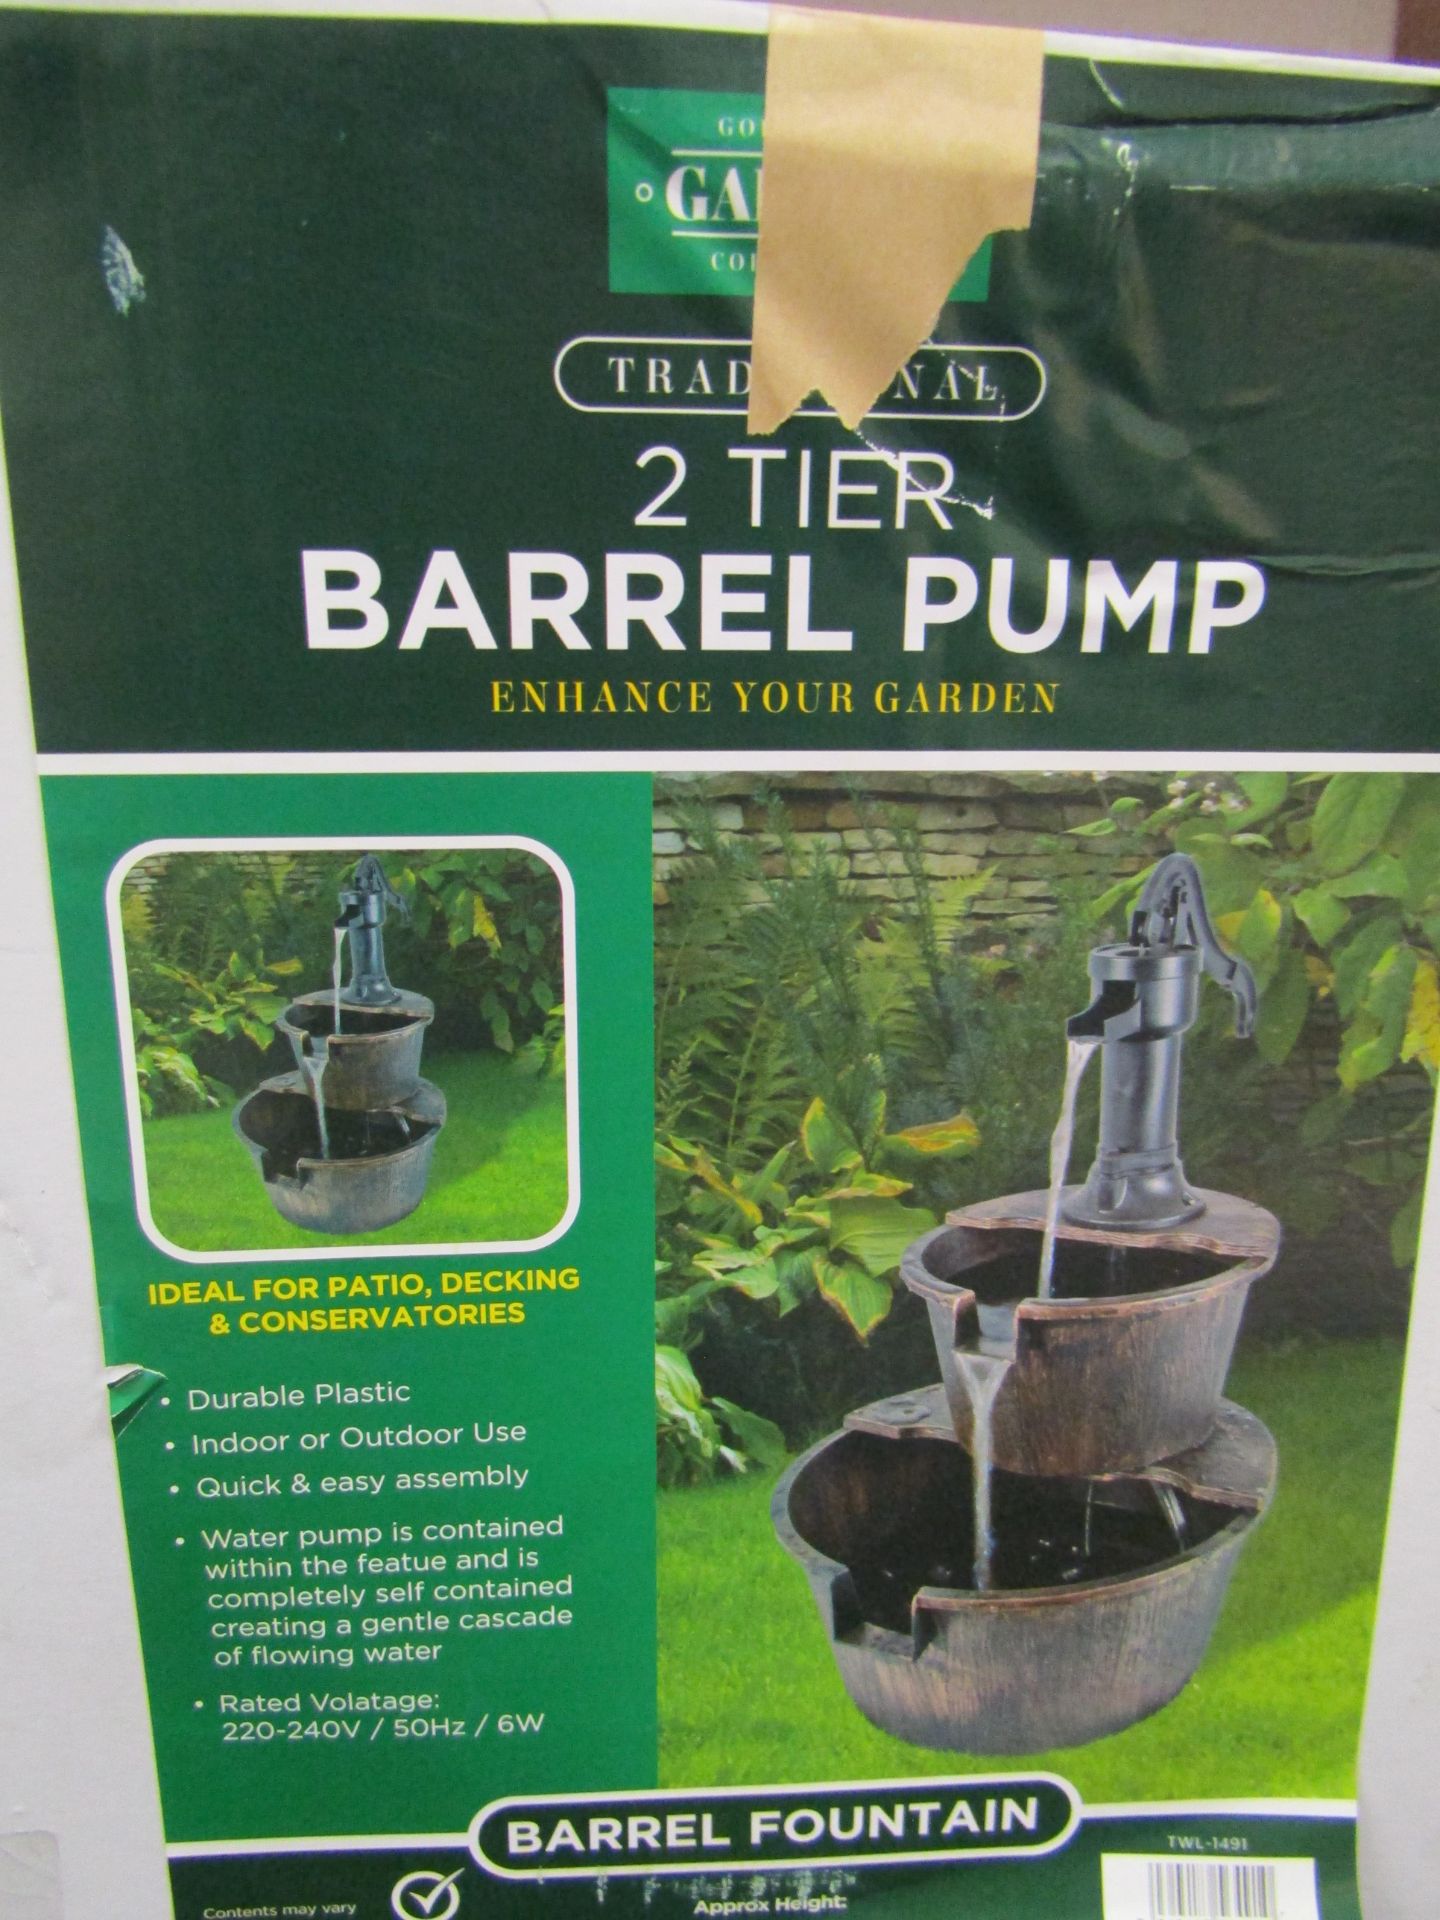 1 x Garden Collection Traditional 2 Tier Barrel Pump Fountain packaged unchecked